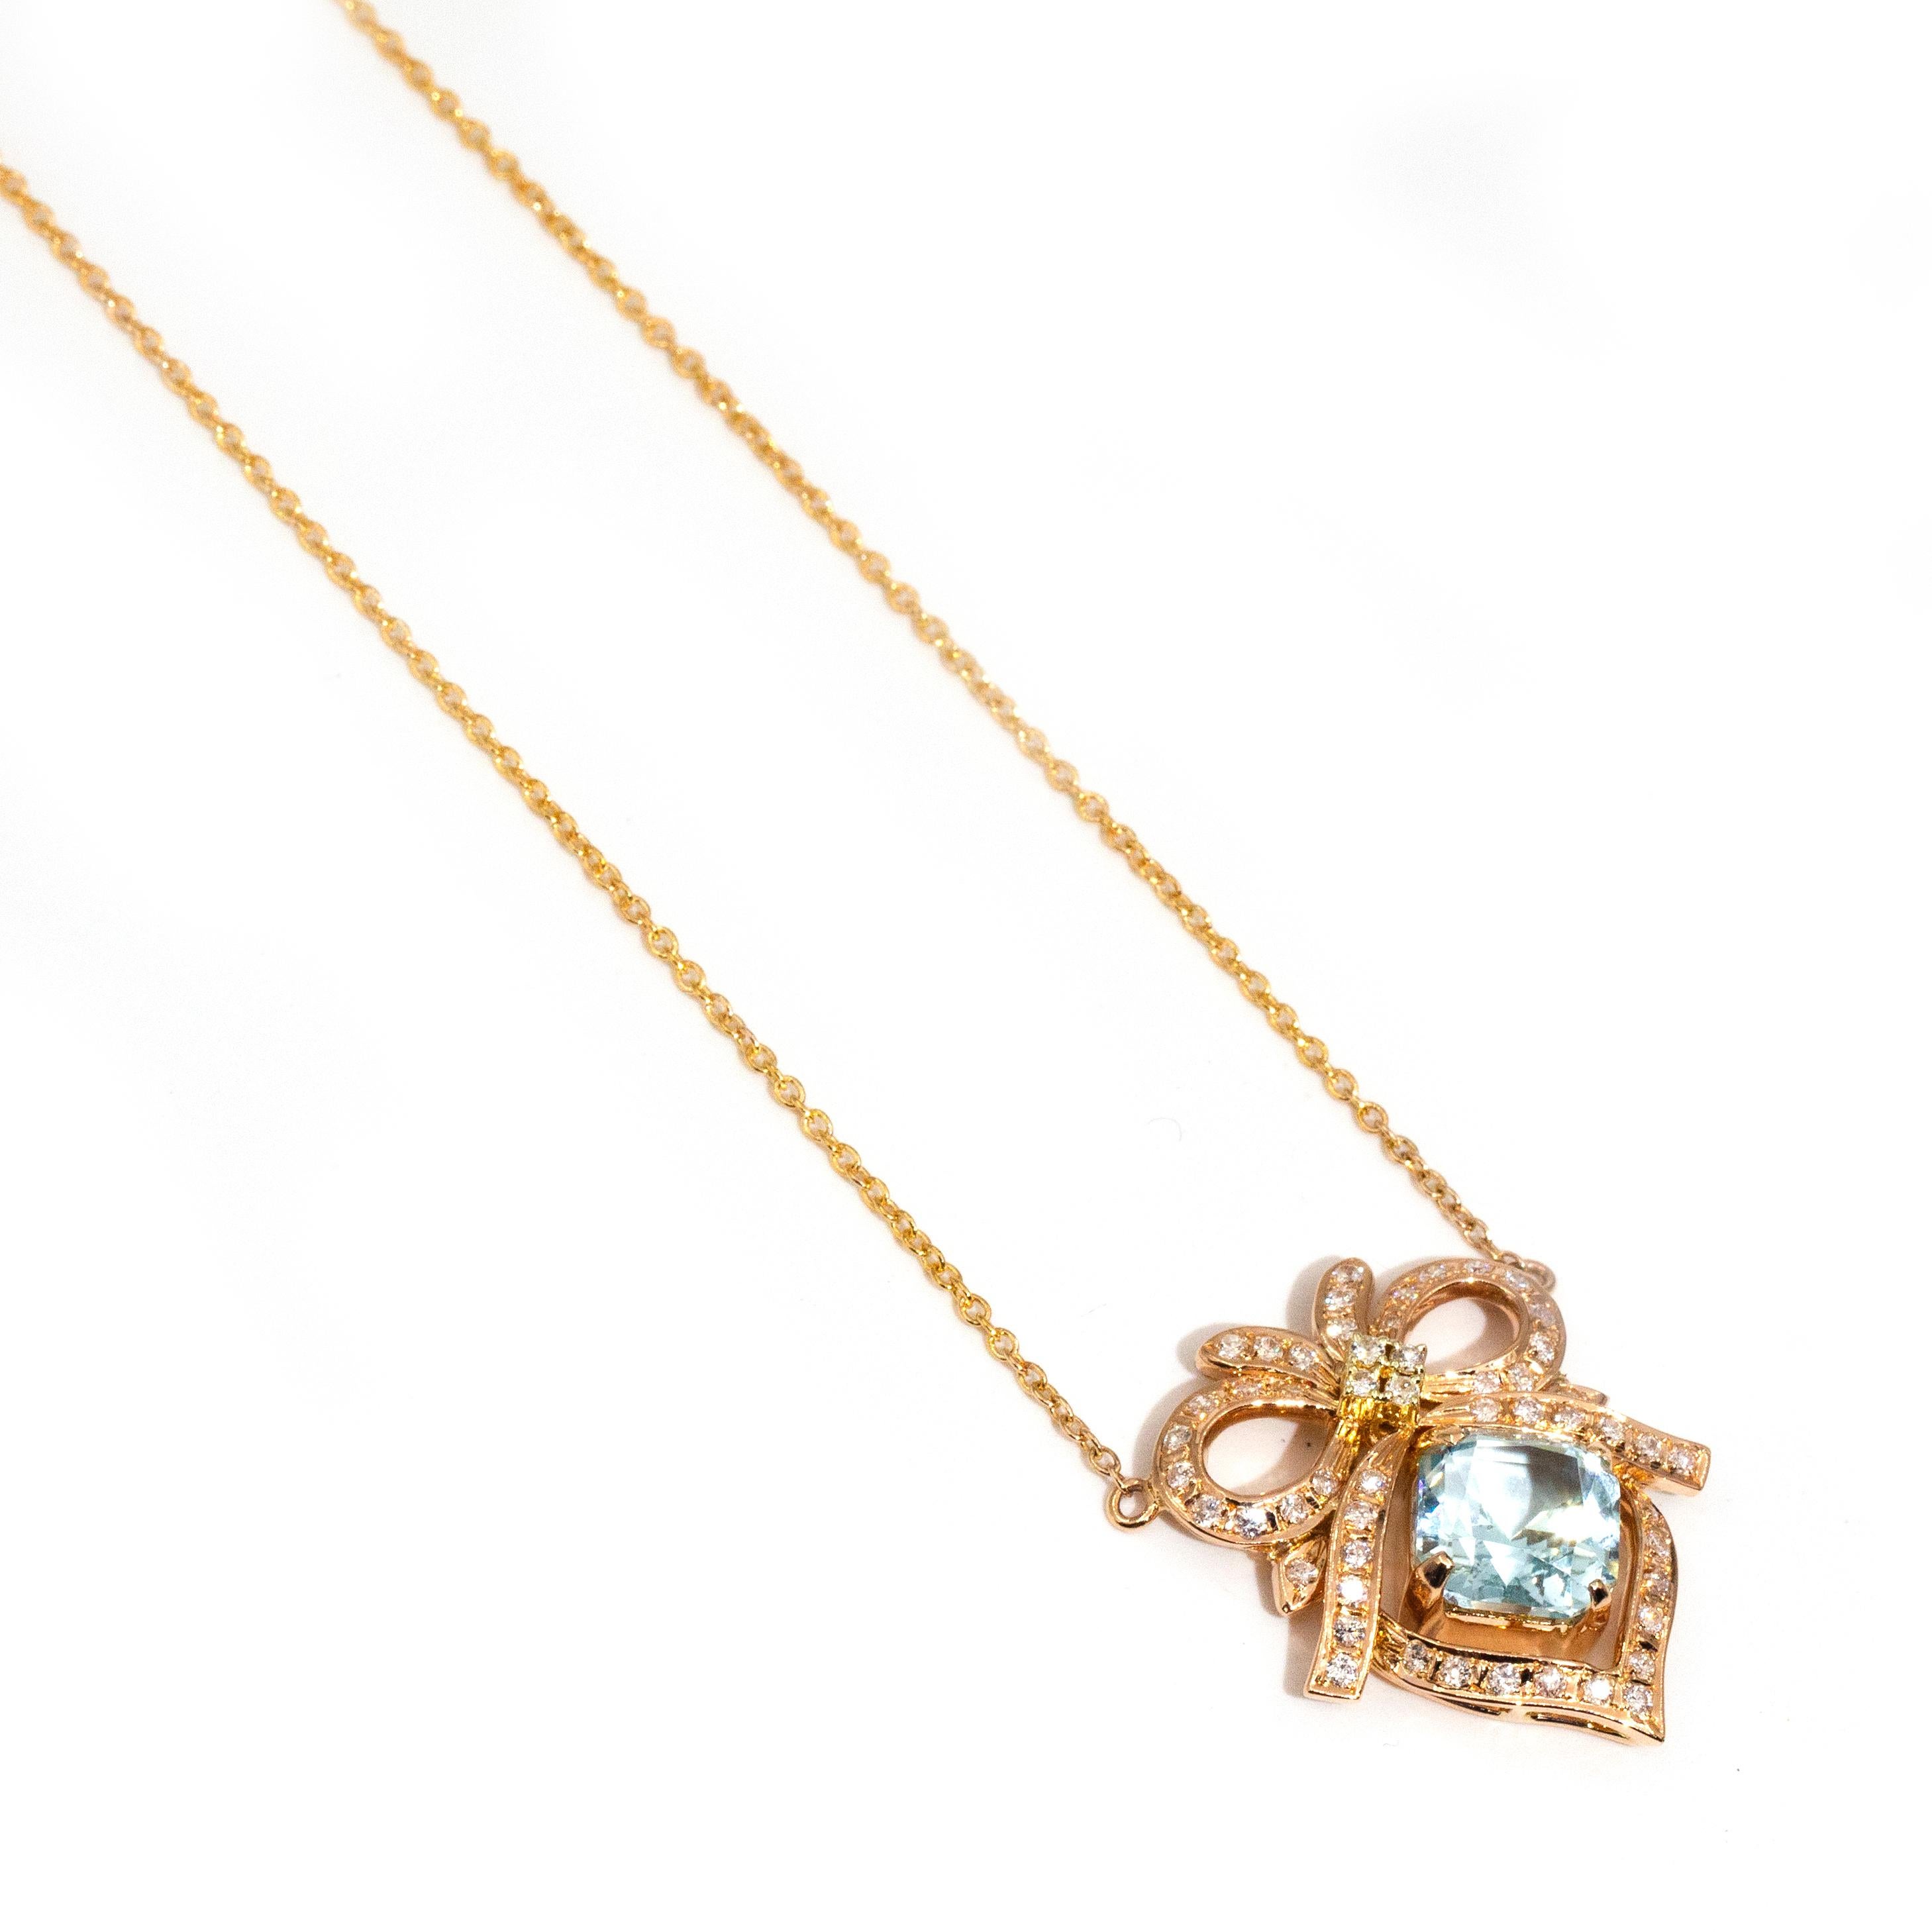 Aquamarine and Diamond Vintage 14 Carat Gold Necklet with 9 Carat Gold Chain 1